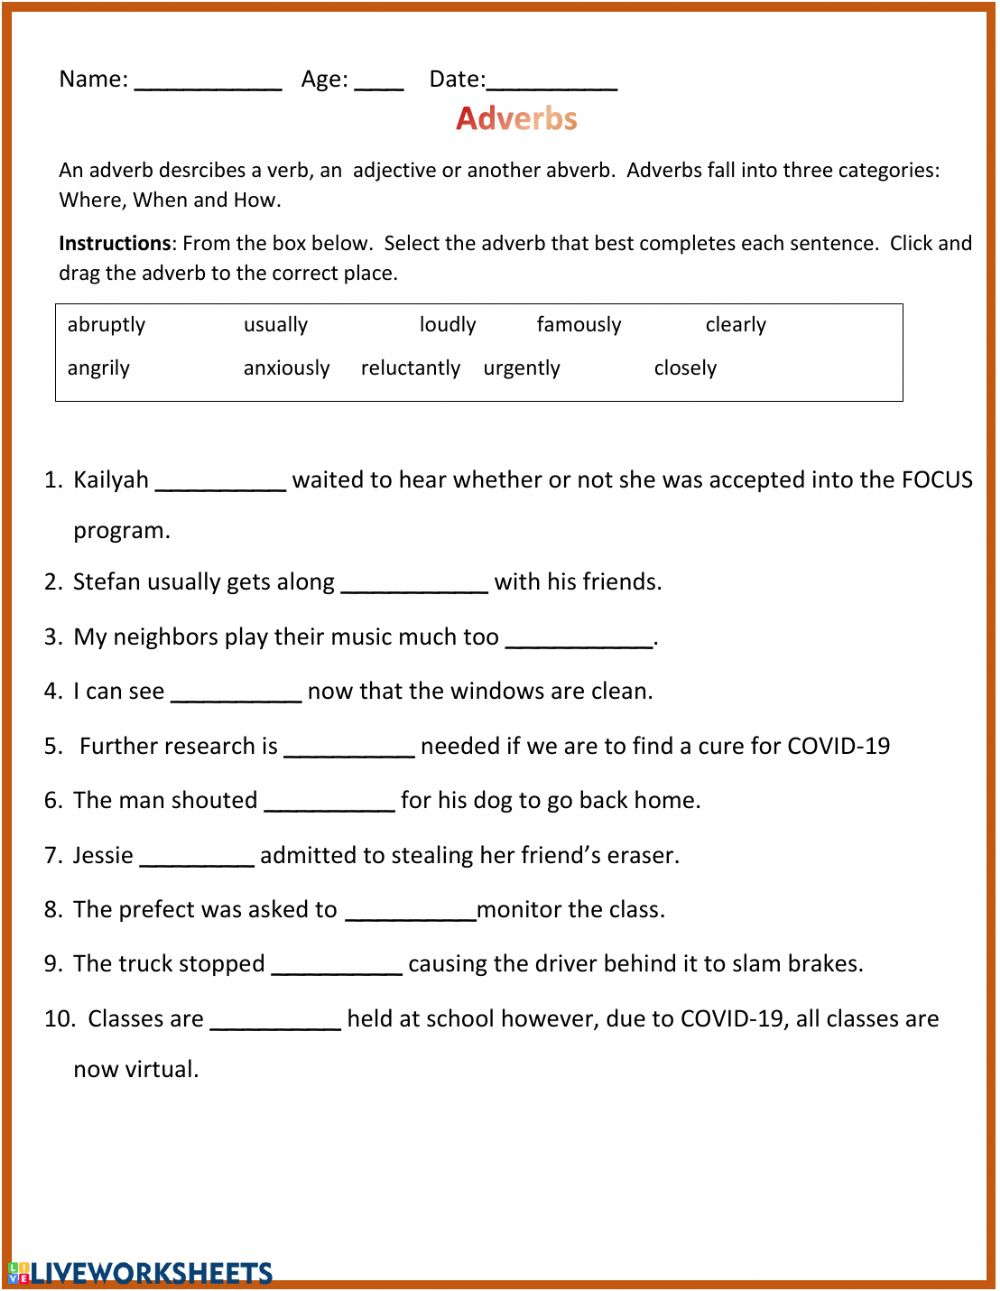 Adverbs Interactive Worksheet For Grade 6